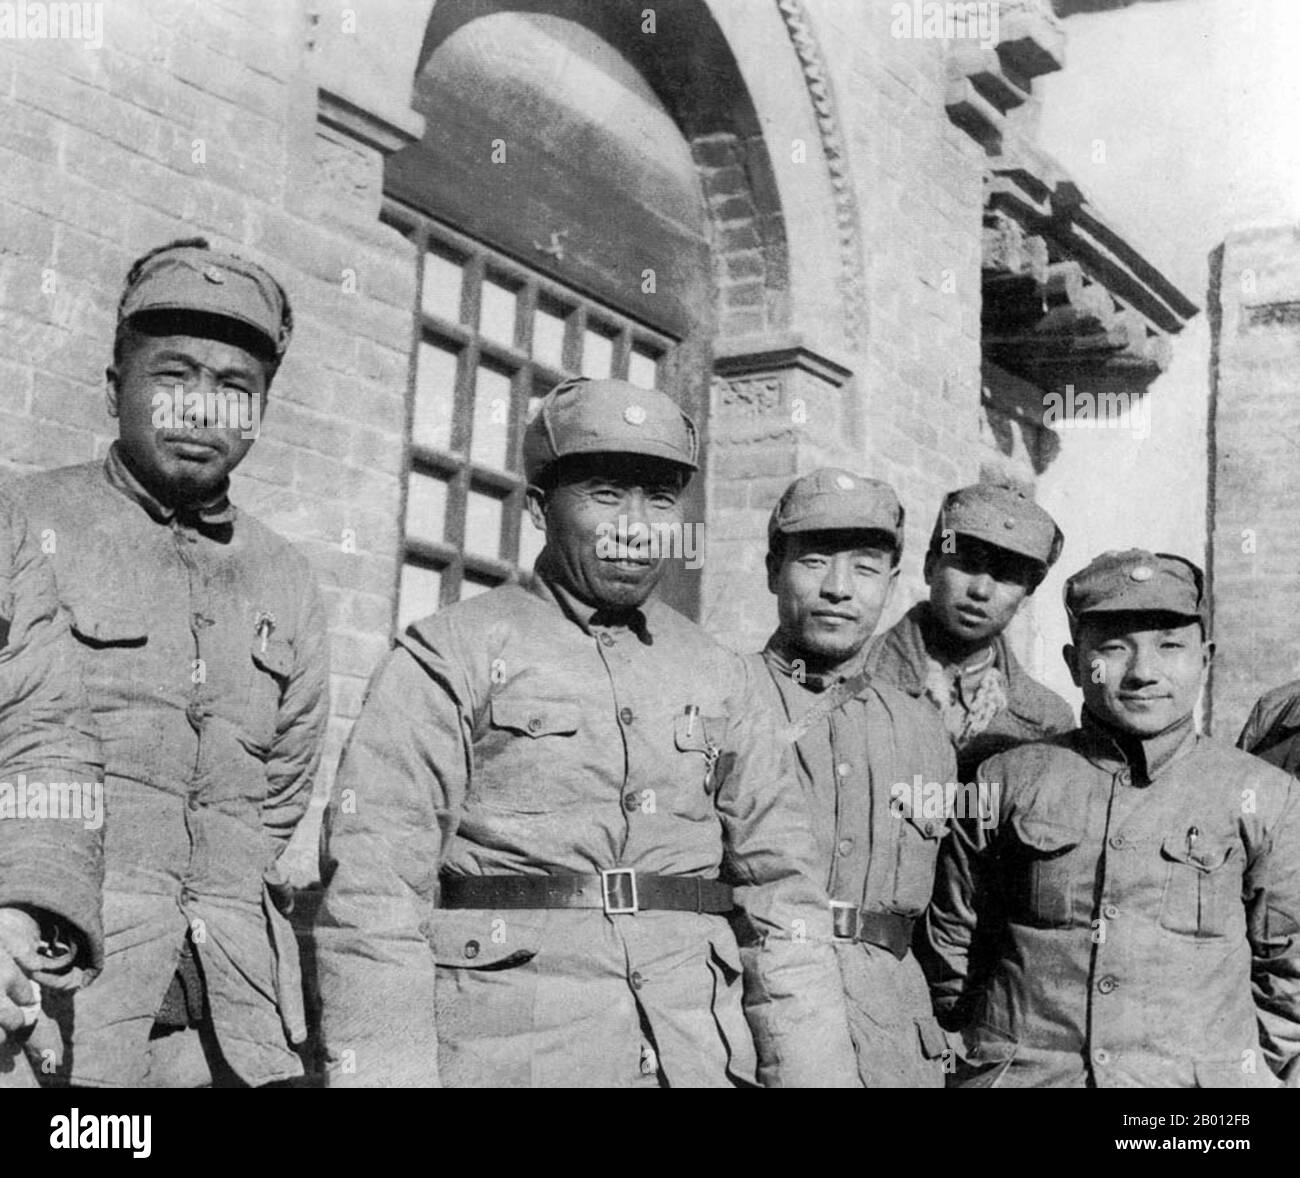 China: Zhu De (1 December 1886 – 6 July 1976) at Yan'an, c. 1937. To the right is a young Deng Xiaoping.  Zhu De was a Chinese Communist military leader and statesman. He is regarded as the founder of the Chinese Red Army (the forerunner of the People's Liberation Army) and the tactician who engineered the victory of the People's Republic of China during the Chinese Civil War. Stock Photo